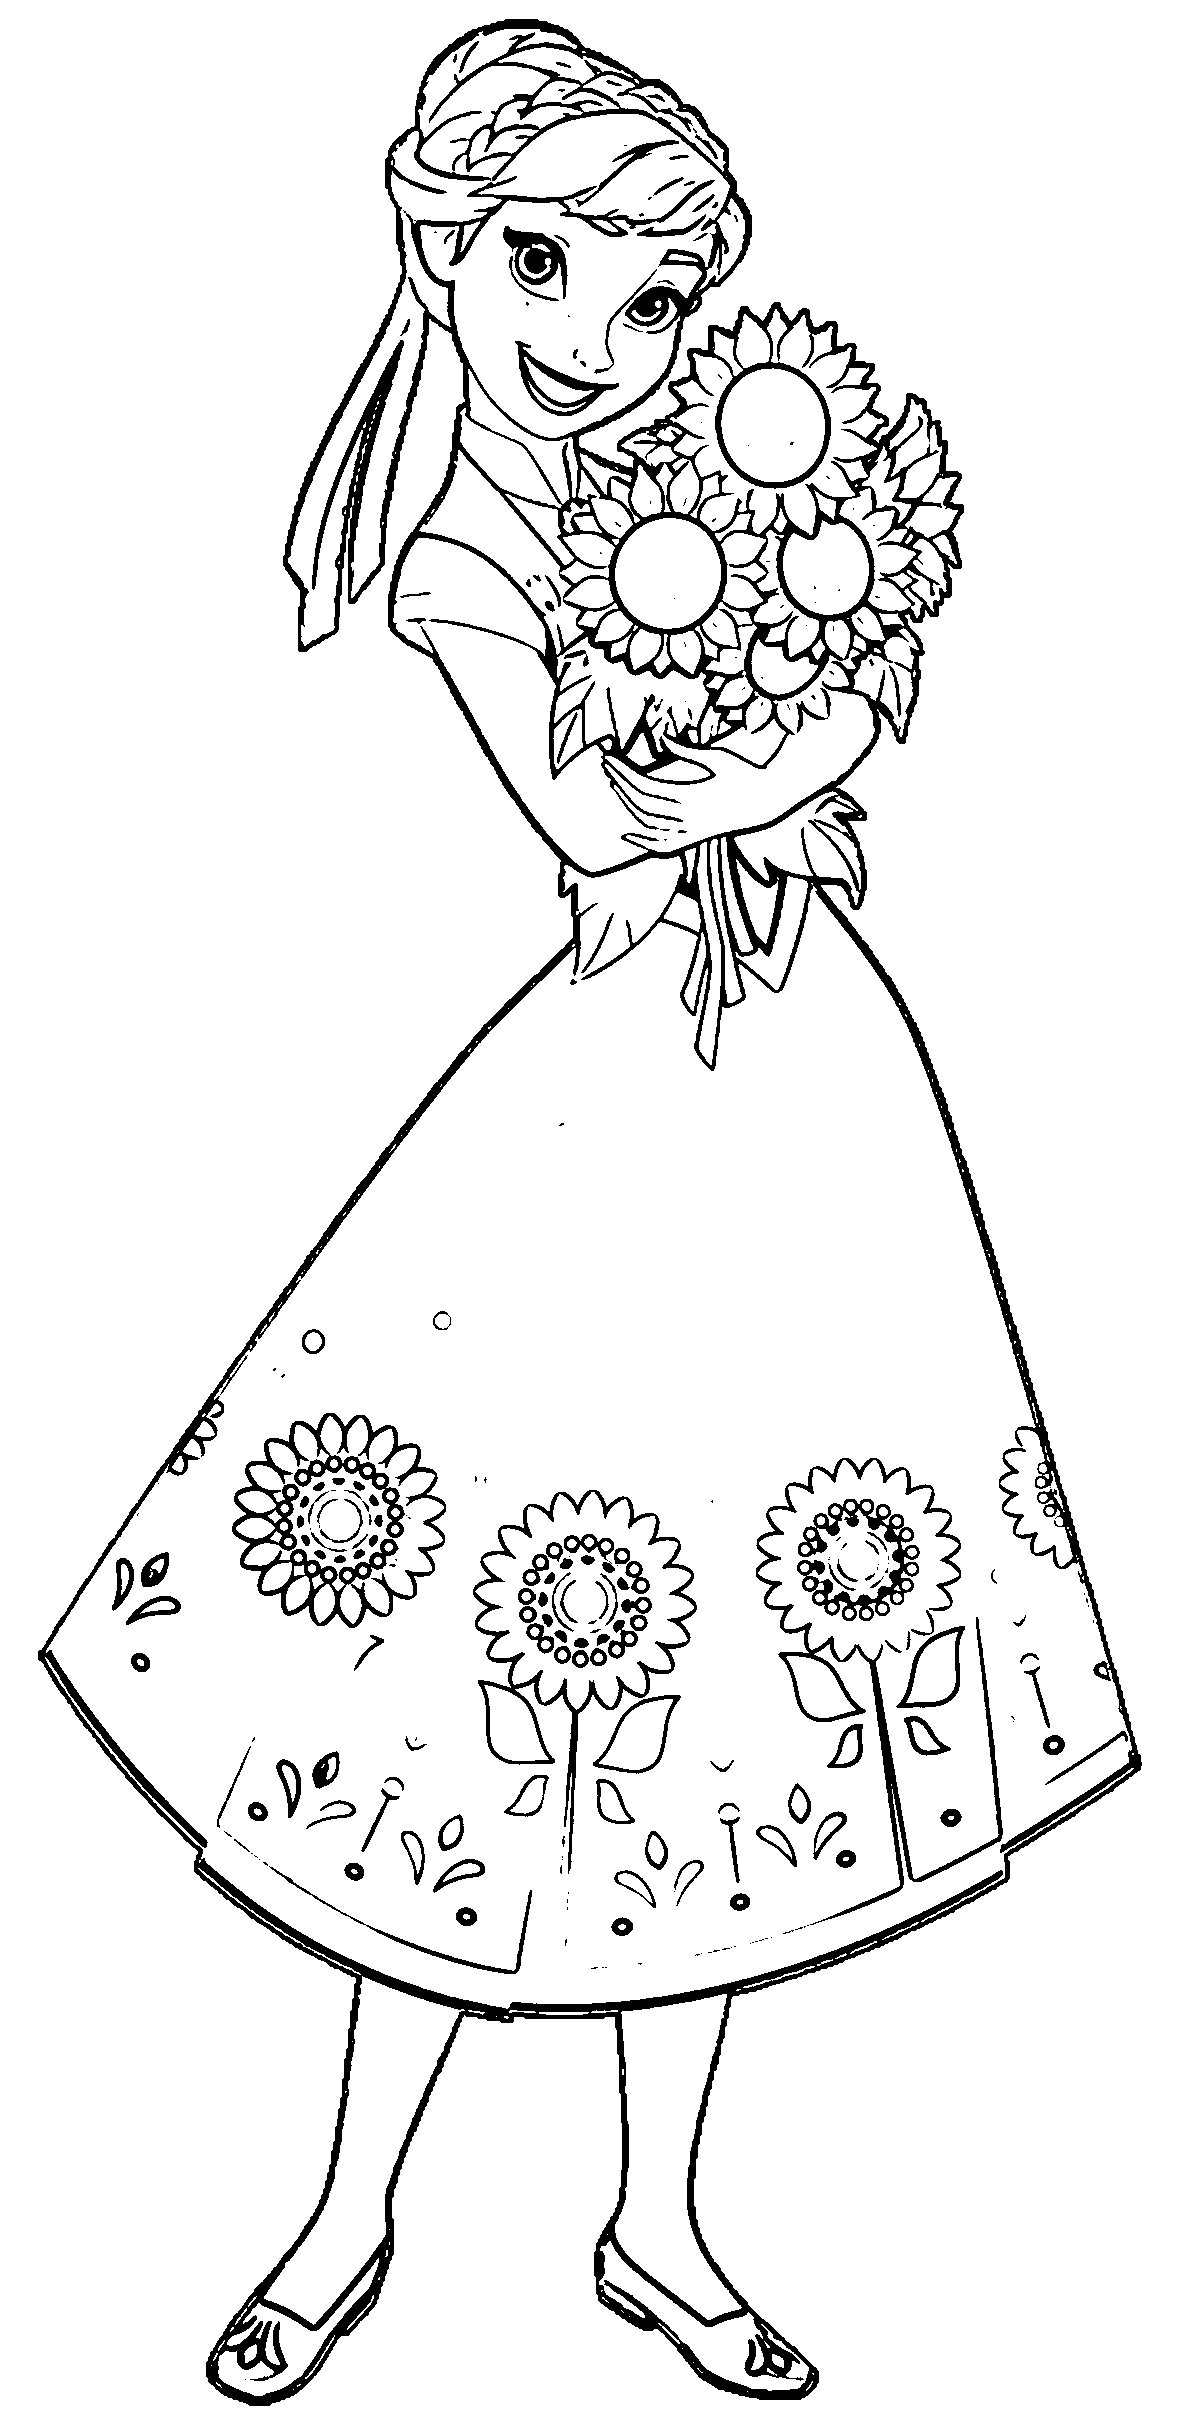 coloring pages of frozen fever songs